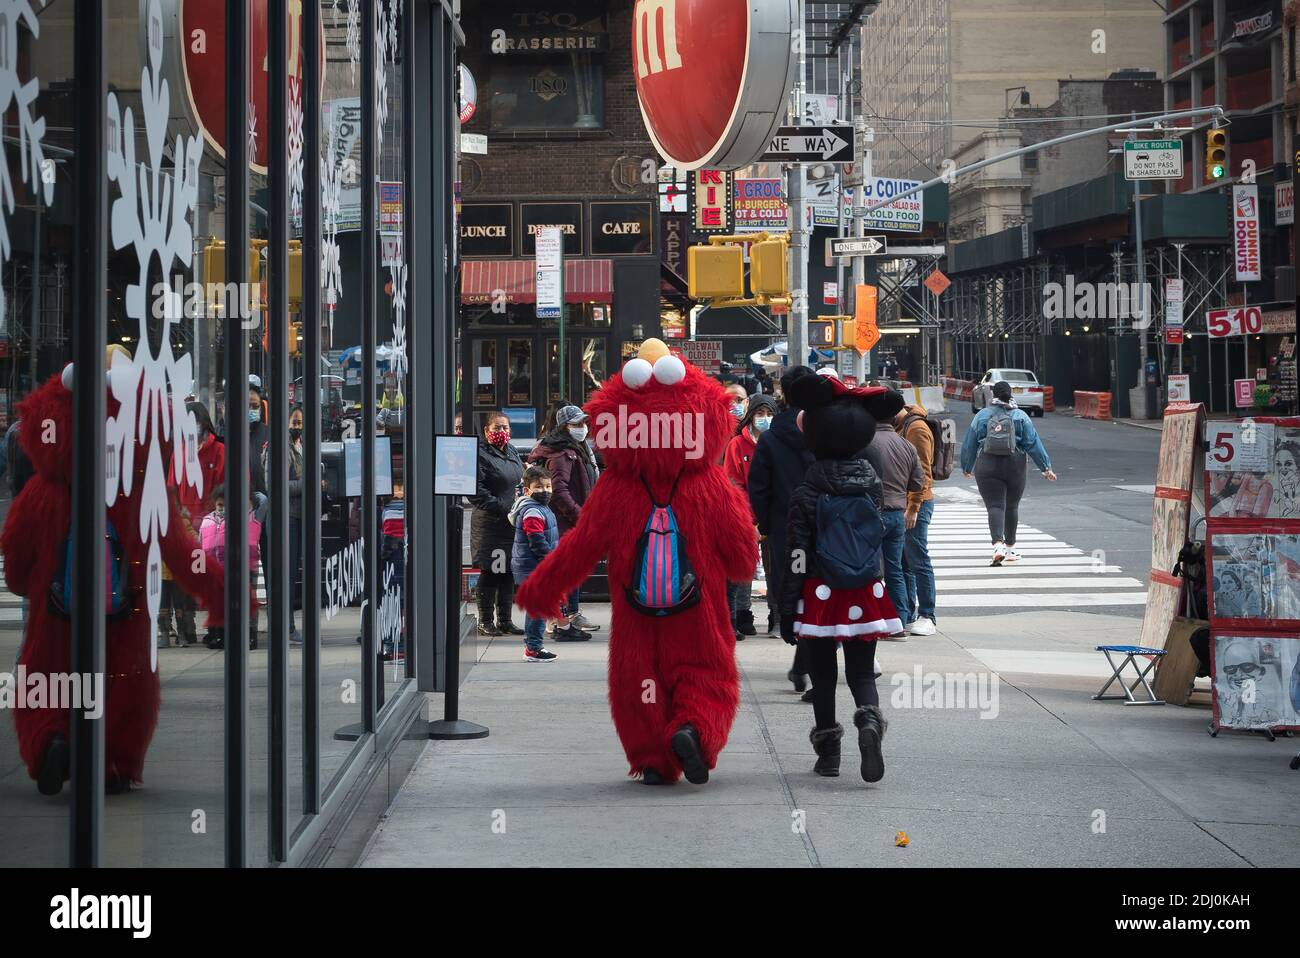 Manhattan, New York. December 11, 2020. Times Square costumed characters meet a group of tourists in front of M&M store on 7th avenue. Stock Photo